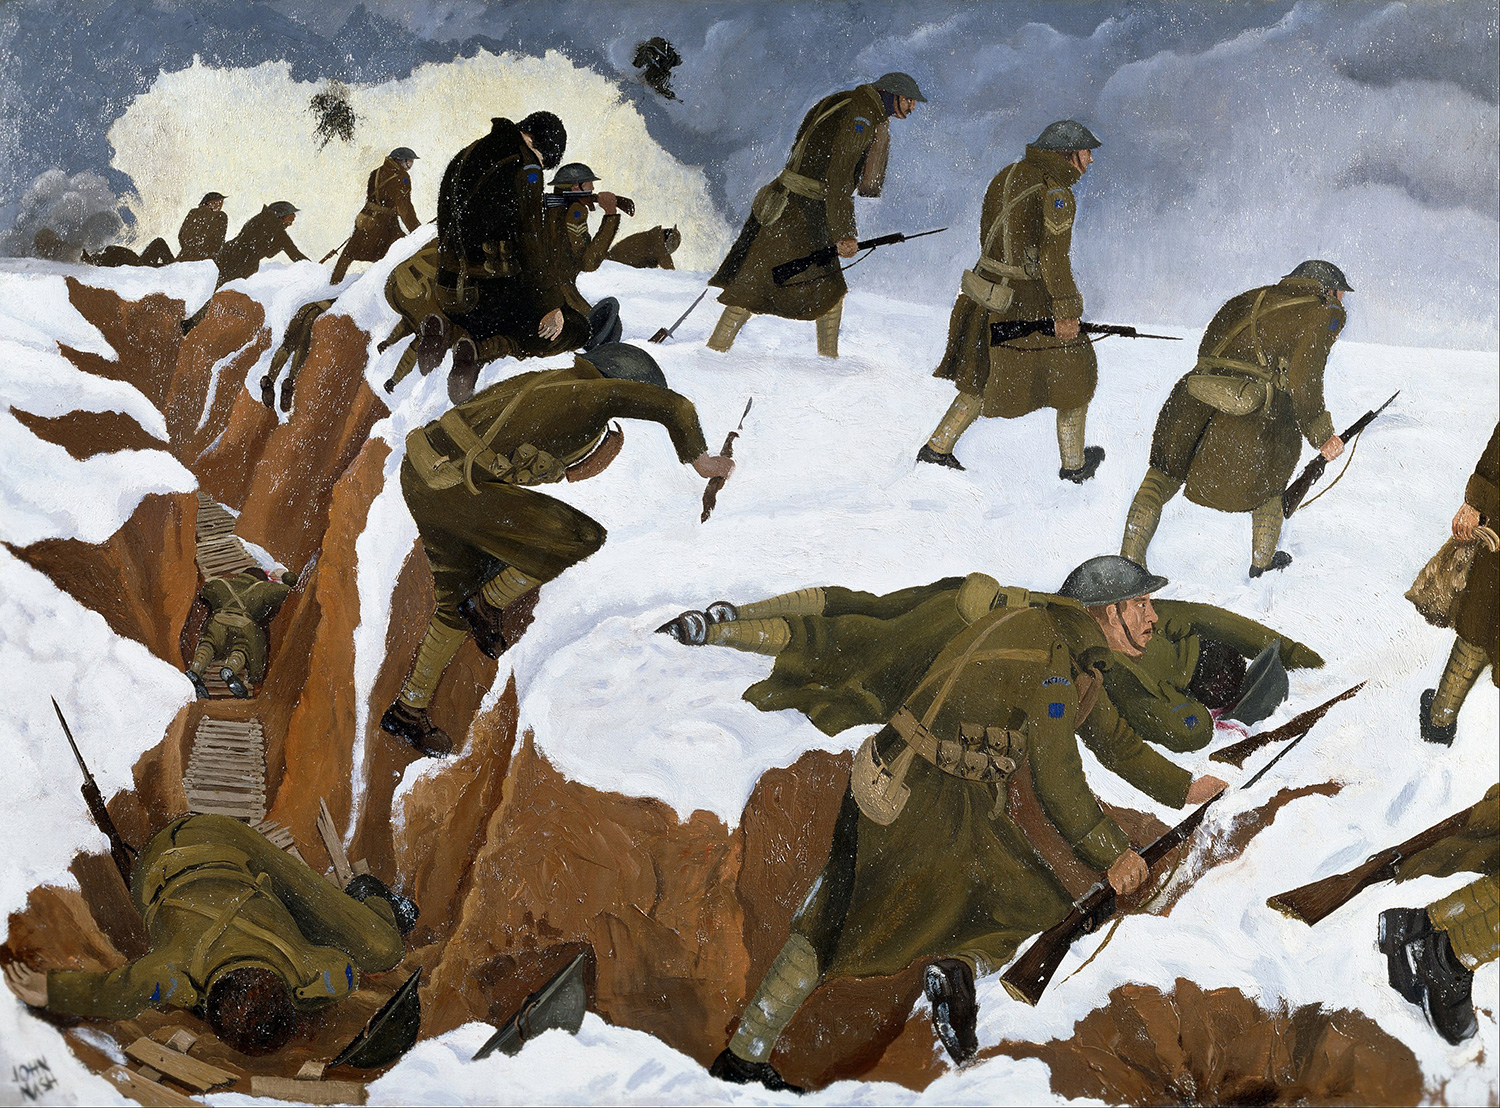 John Nash, Over the Top, 1st Artists Rifles at Marcoing, 30th December 1917, 1918, Oil on Canvas. Courtesy of the Imperial War Museum.